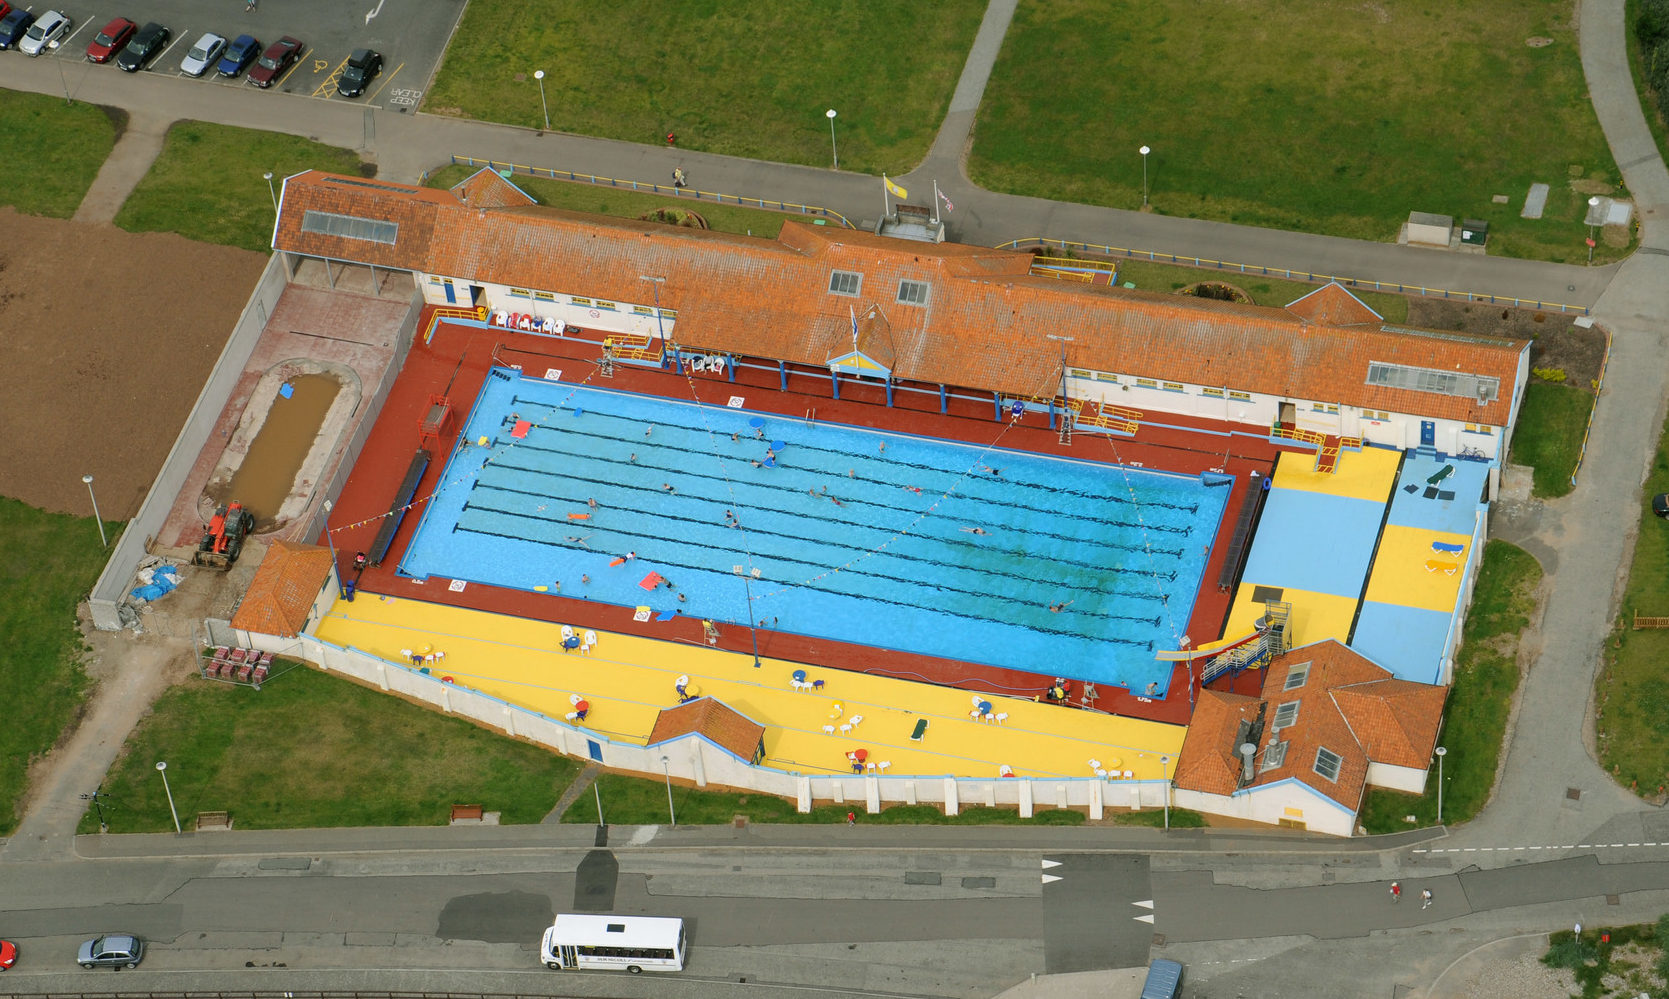 Stonehaven open air pool.